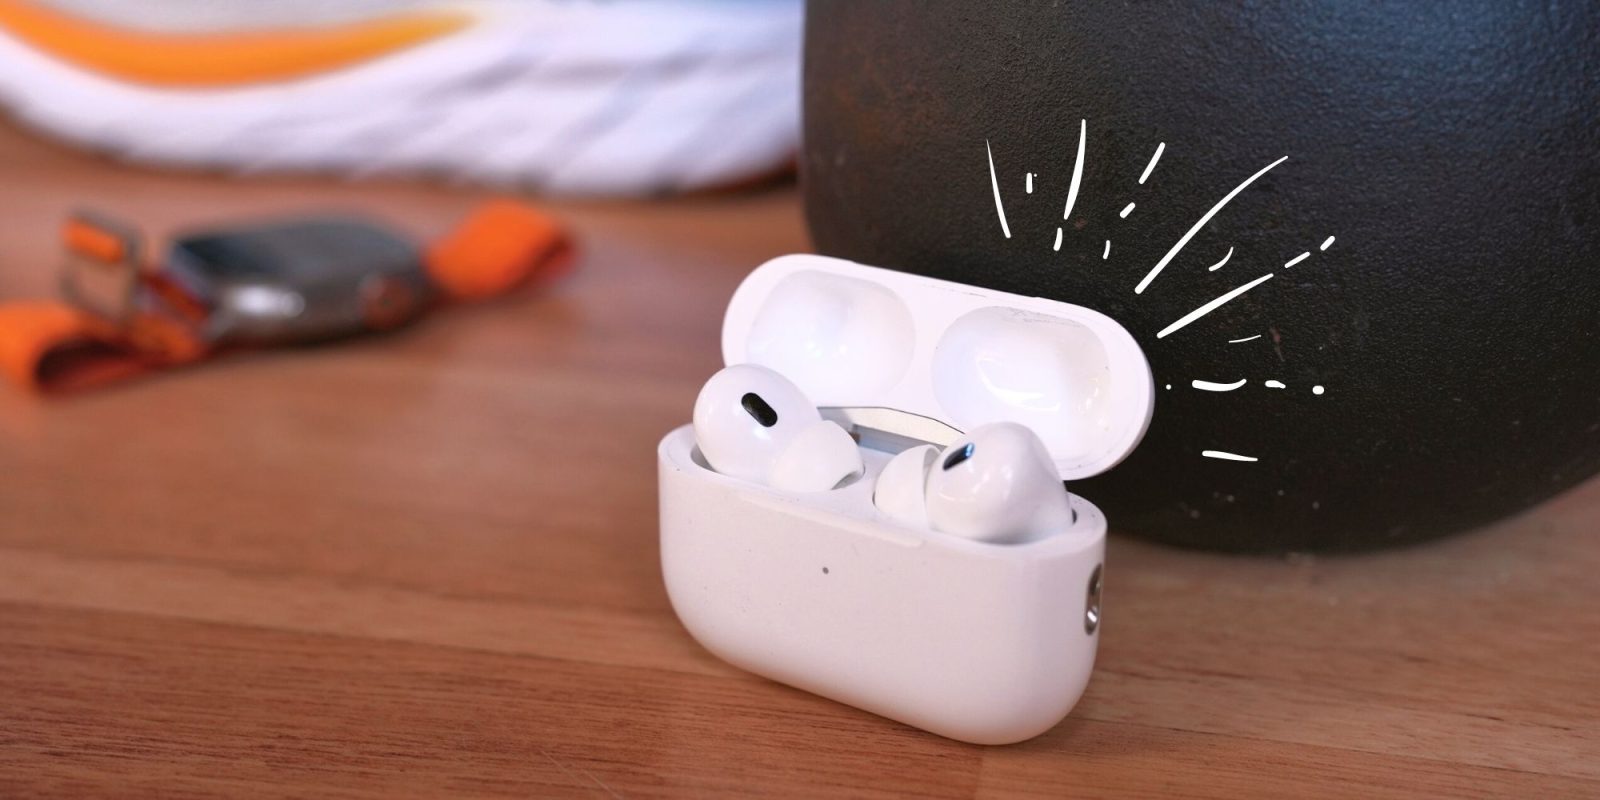 Everything You Need to Know About the Second Generation AirPods